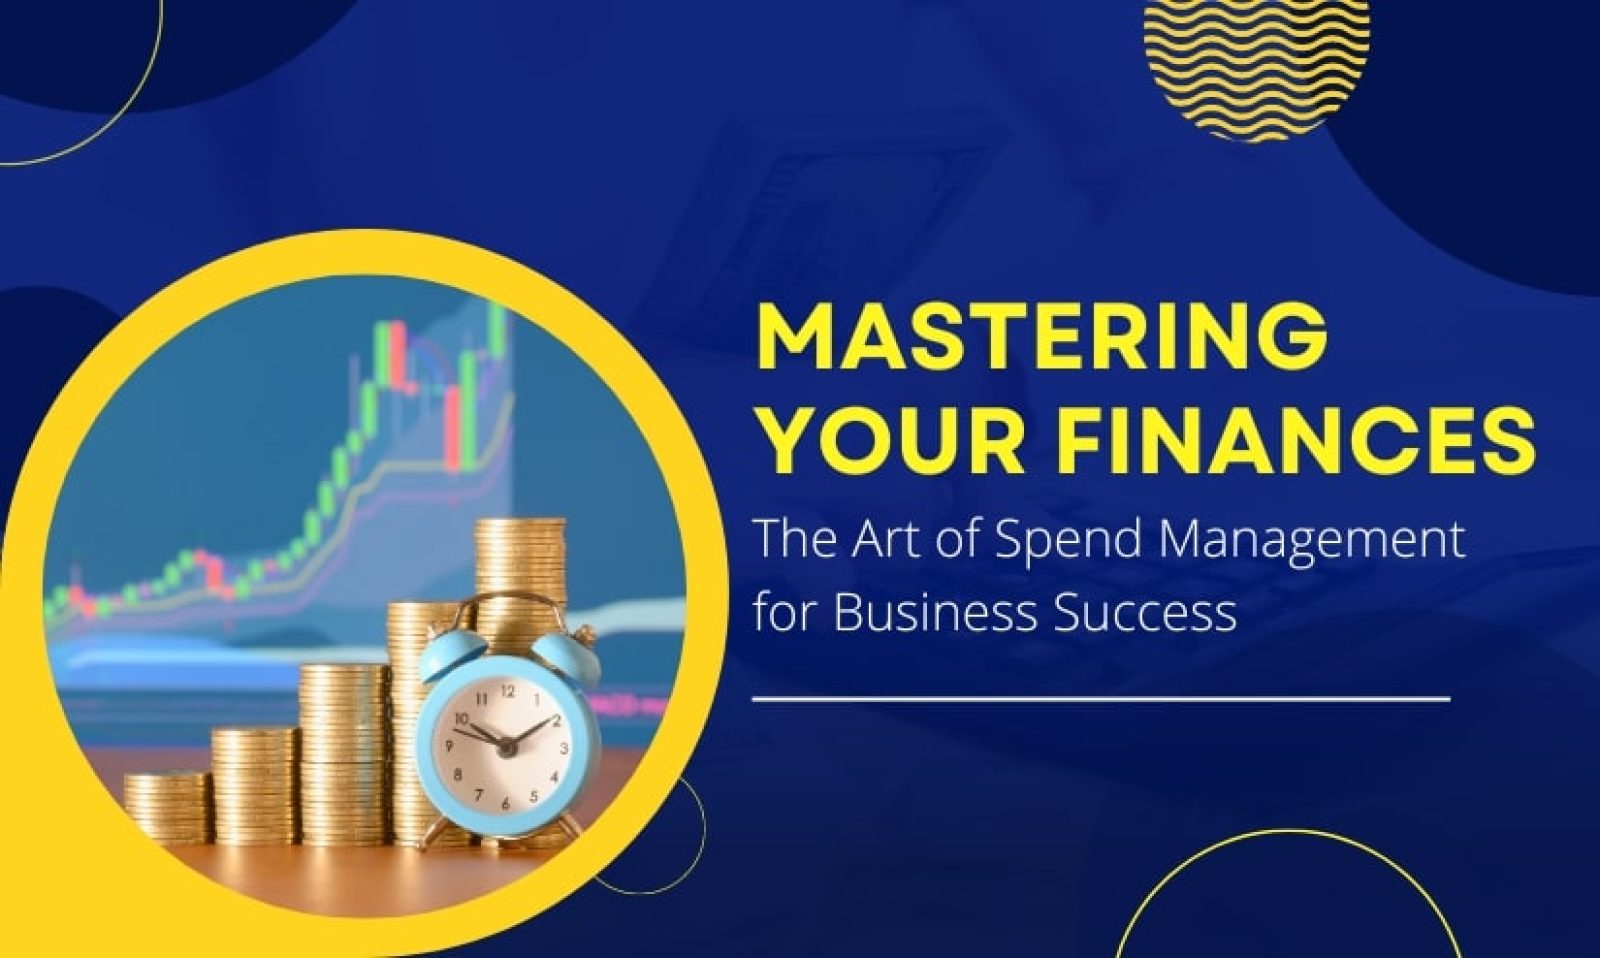 Mastering Your Finances The Art of Spend Management for Business Success